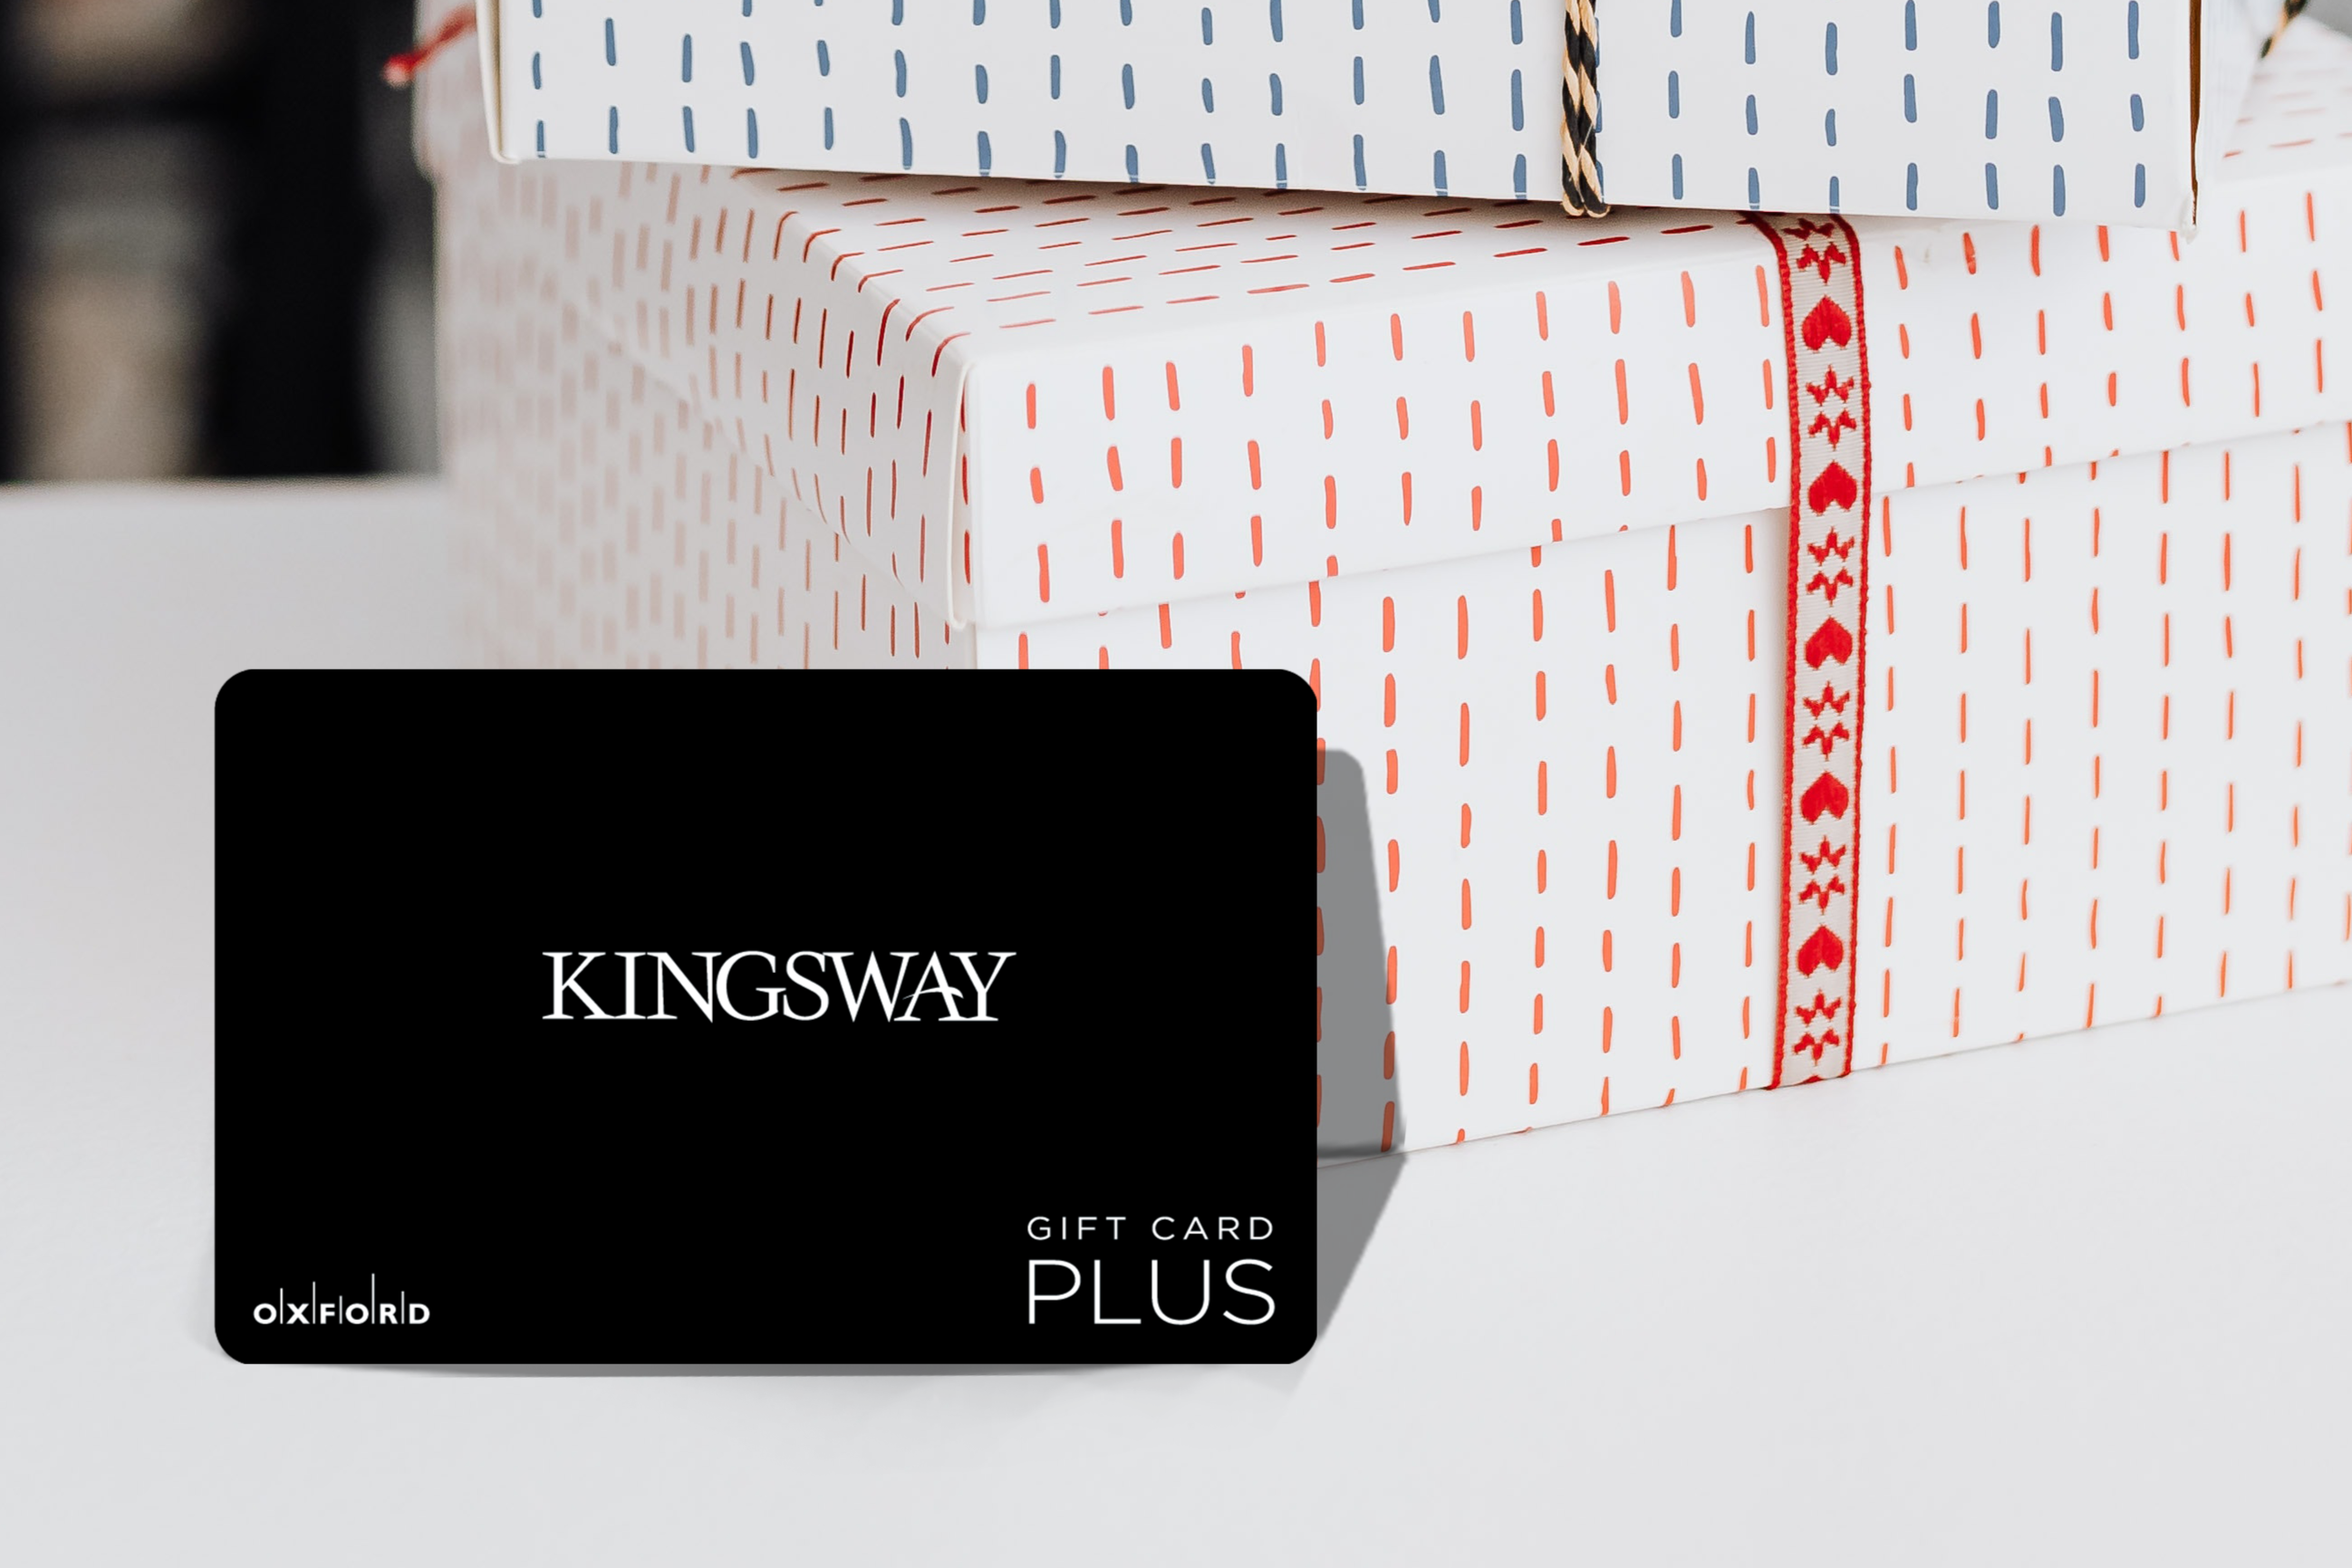 promotional image of a black kingsway gift card in front of two gift boxes